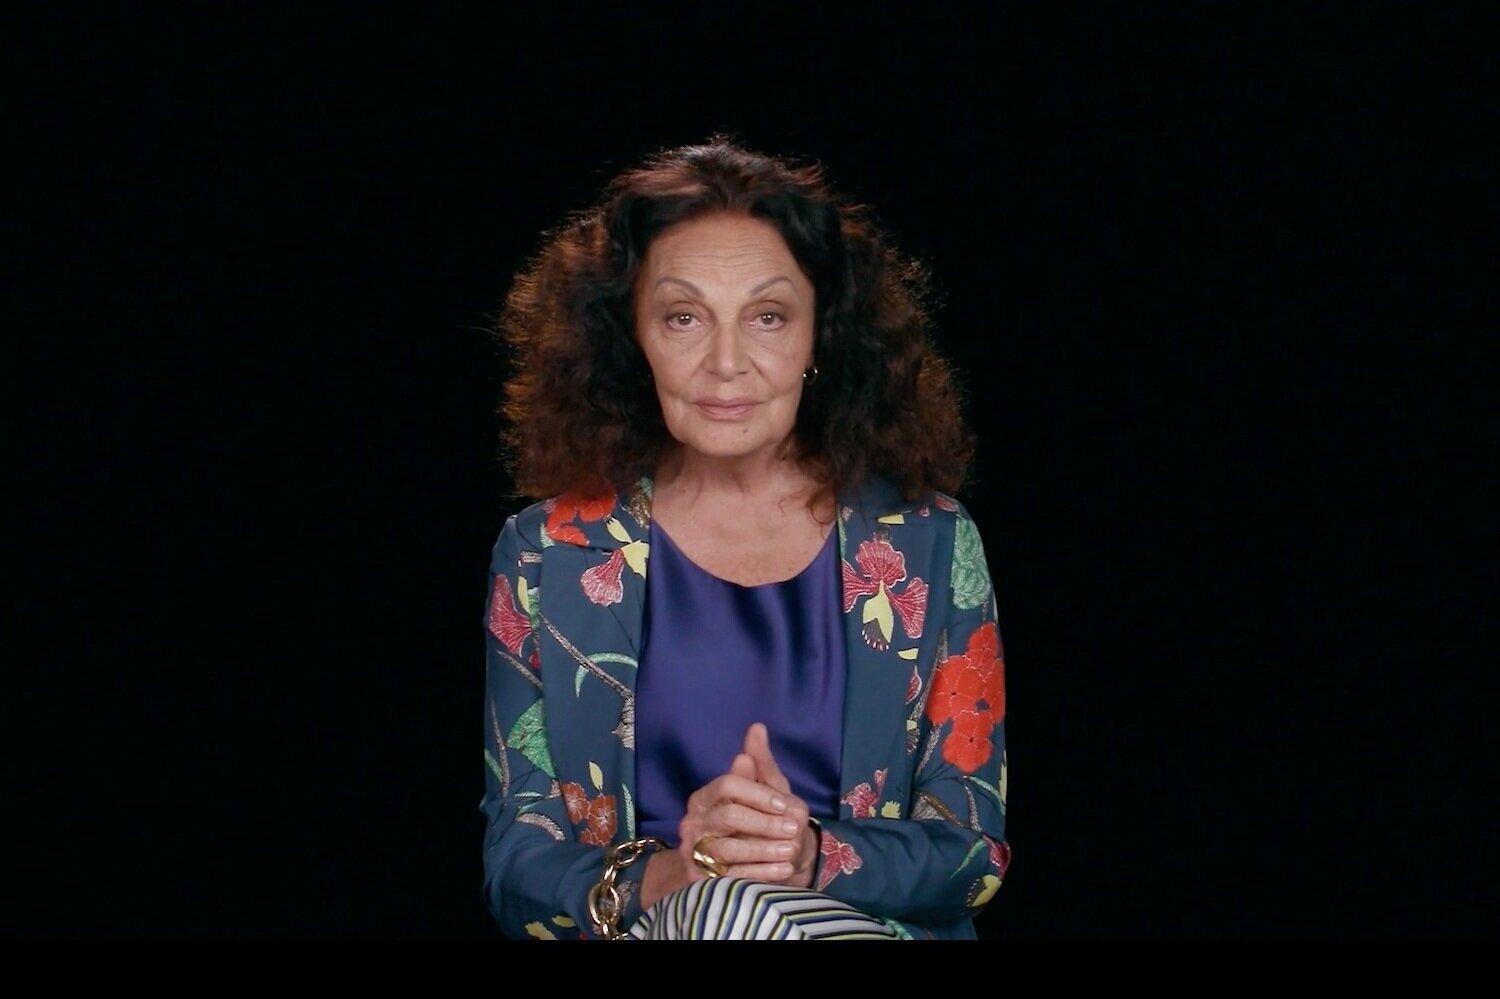  Iconic designer Diane von Furstenberg’s love for words and language inspired her to sponsor the WORDS MATTER gallery. 